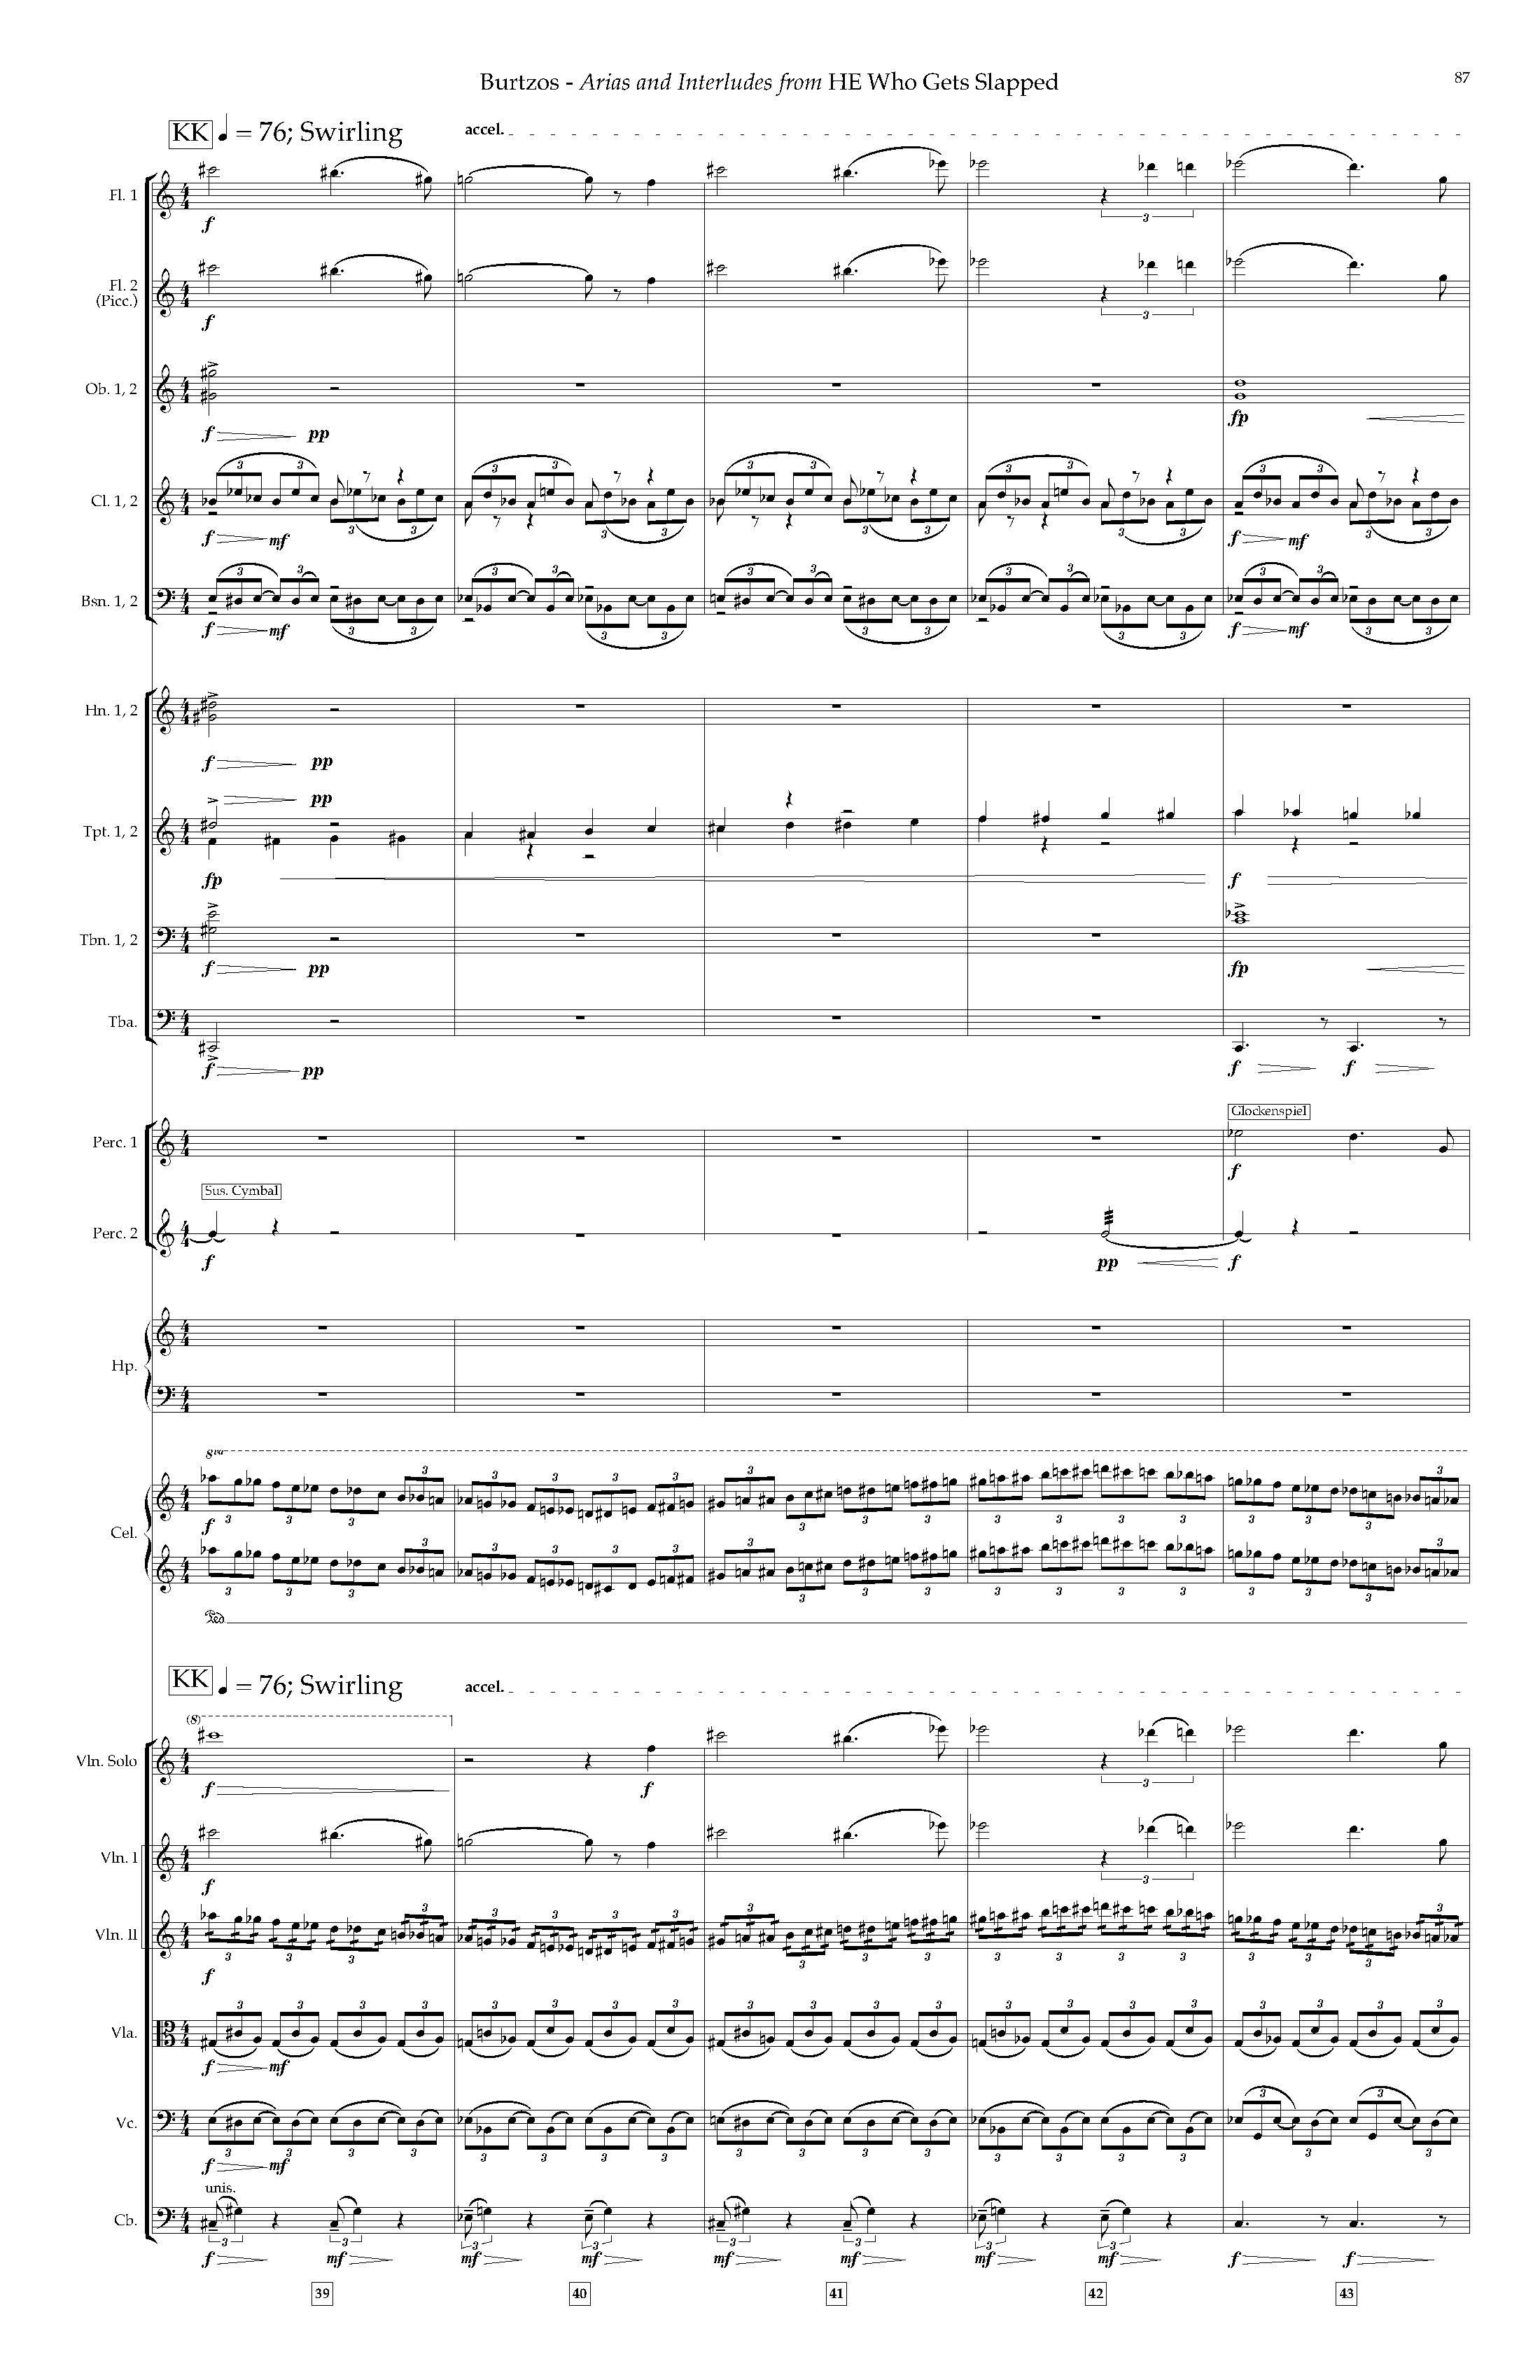 Arias and Interludes from HWGS - Complete Score_Page_93.jpg